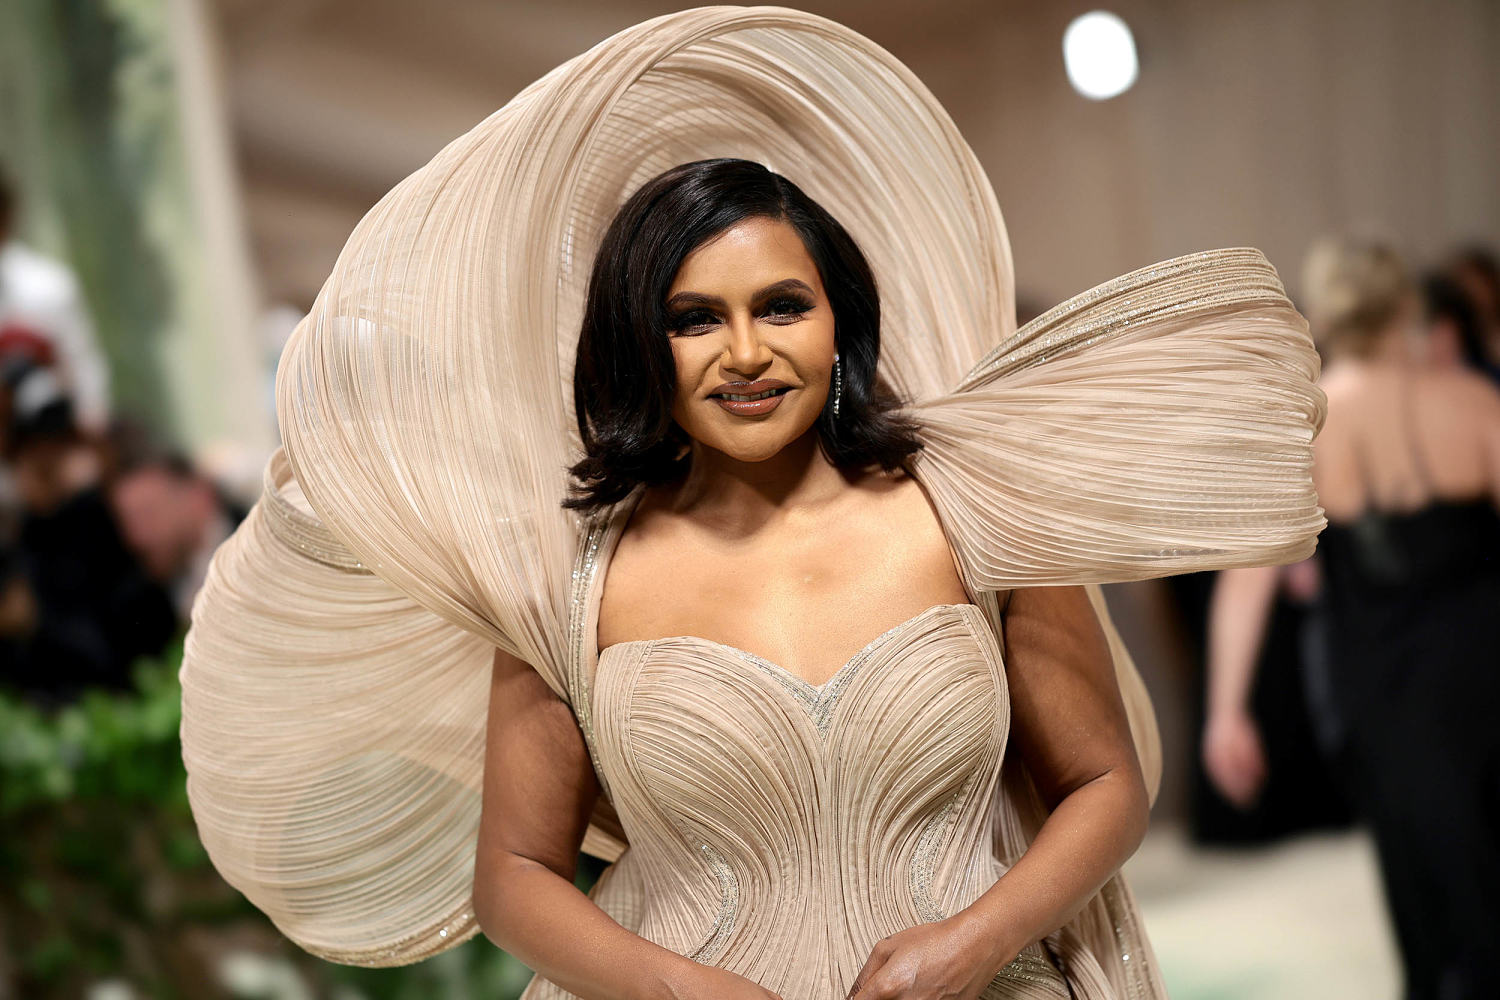 the meaning of mindy kaling's met gala dress